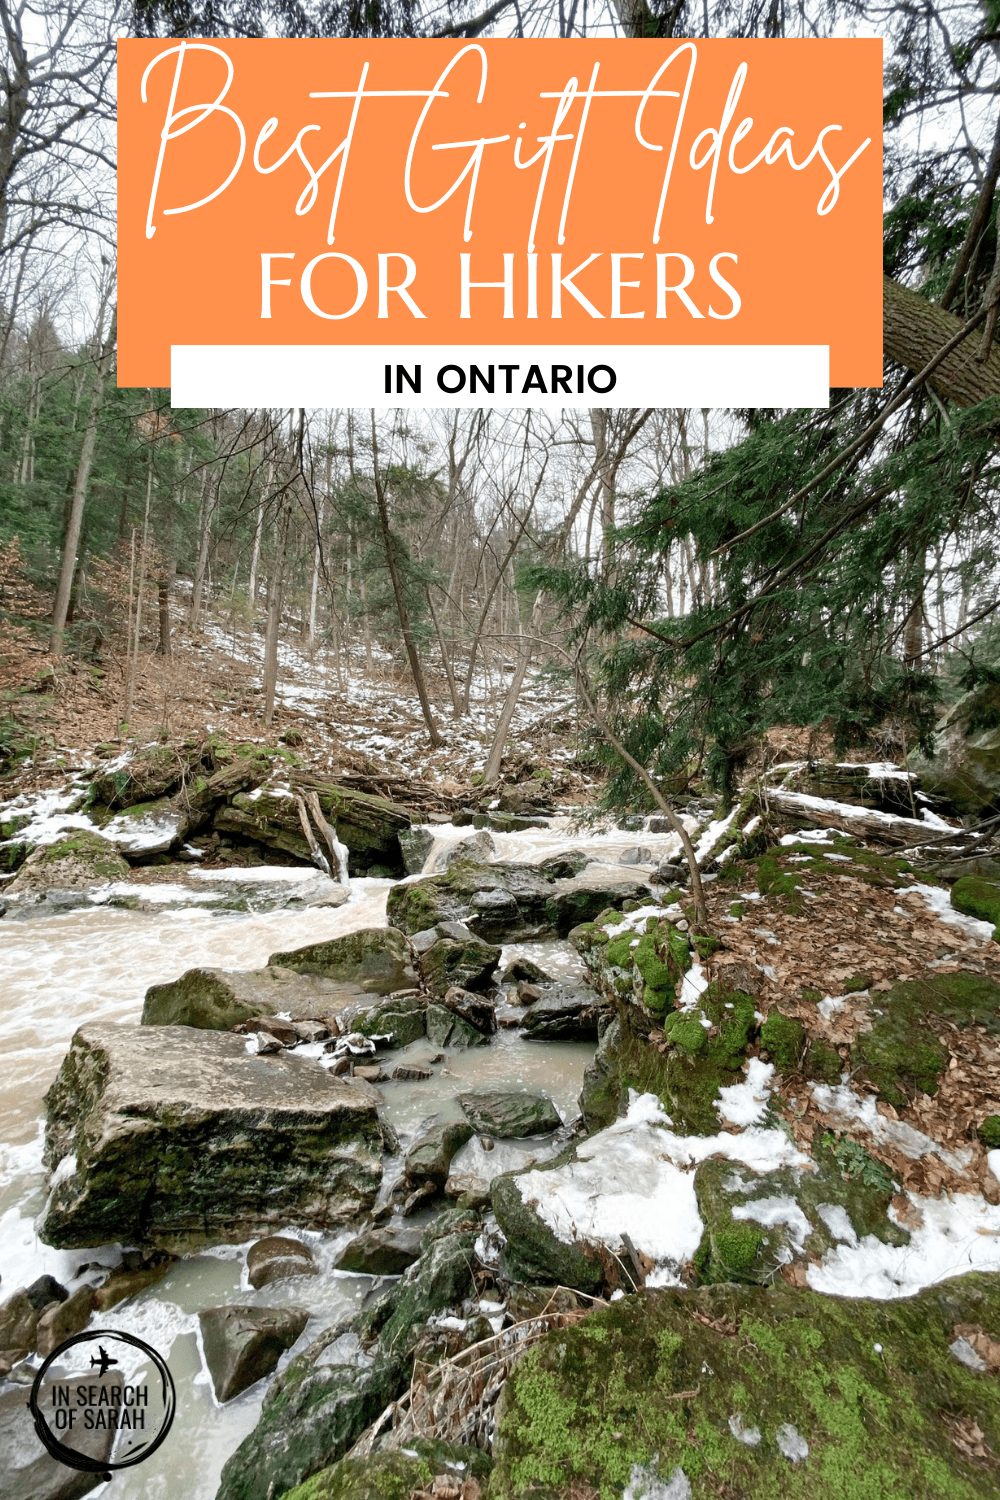 gift ideas for hikers